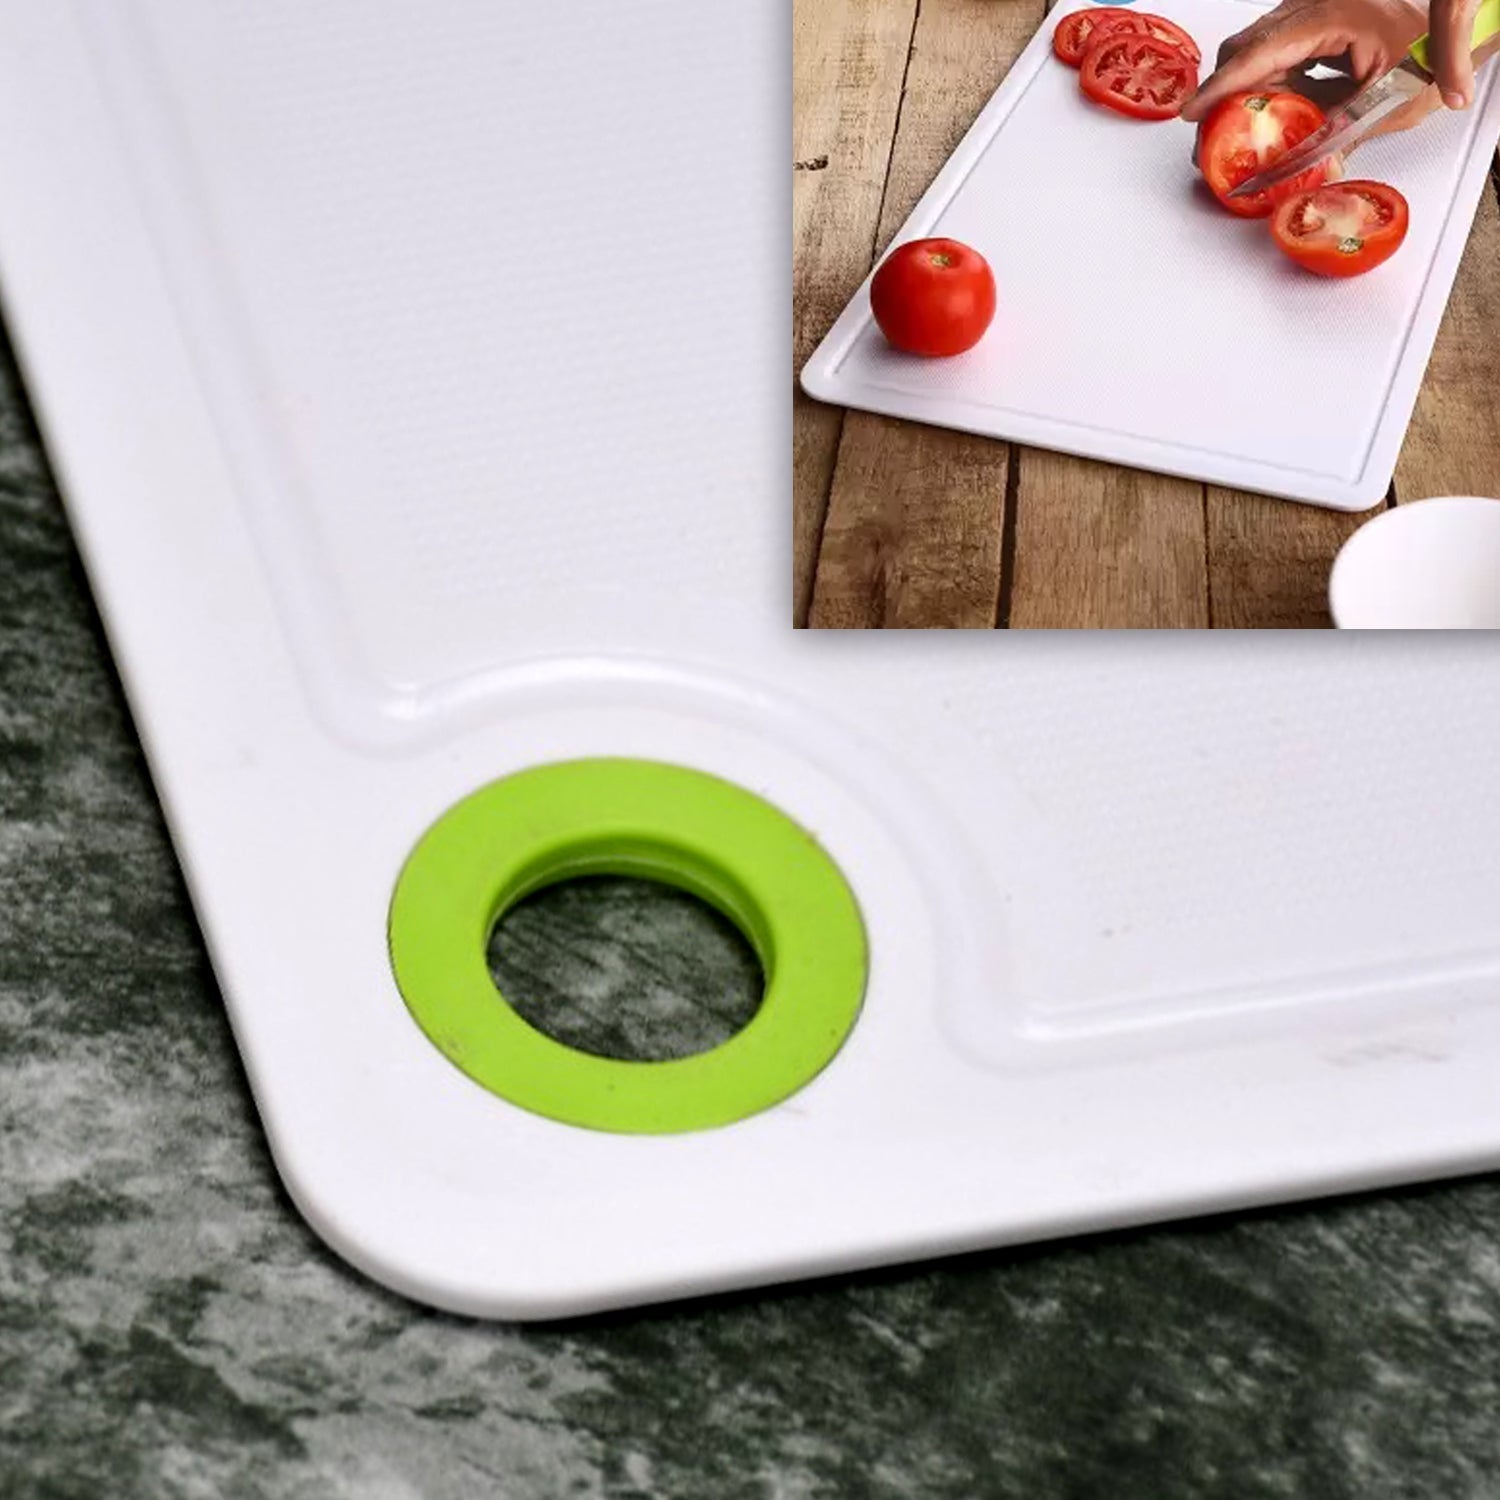 2316 Fruit & Vegetable Chopping Board Plastic Cutting Board For Kitchen Dukandaily